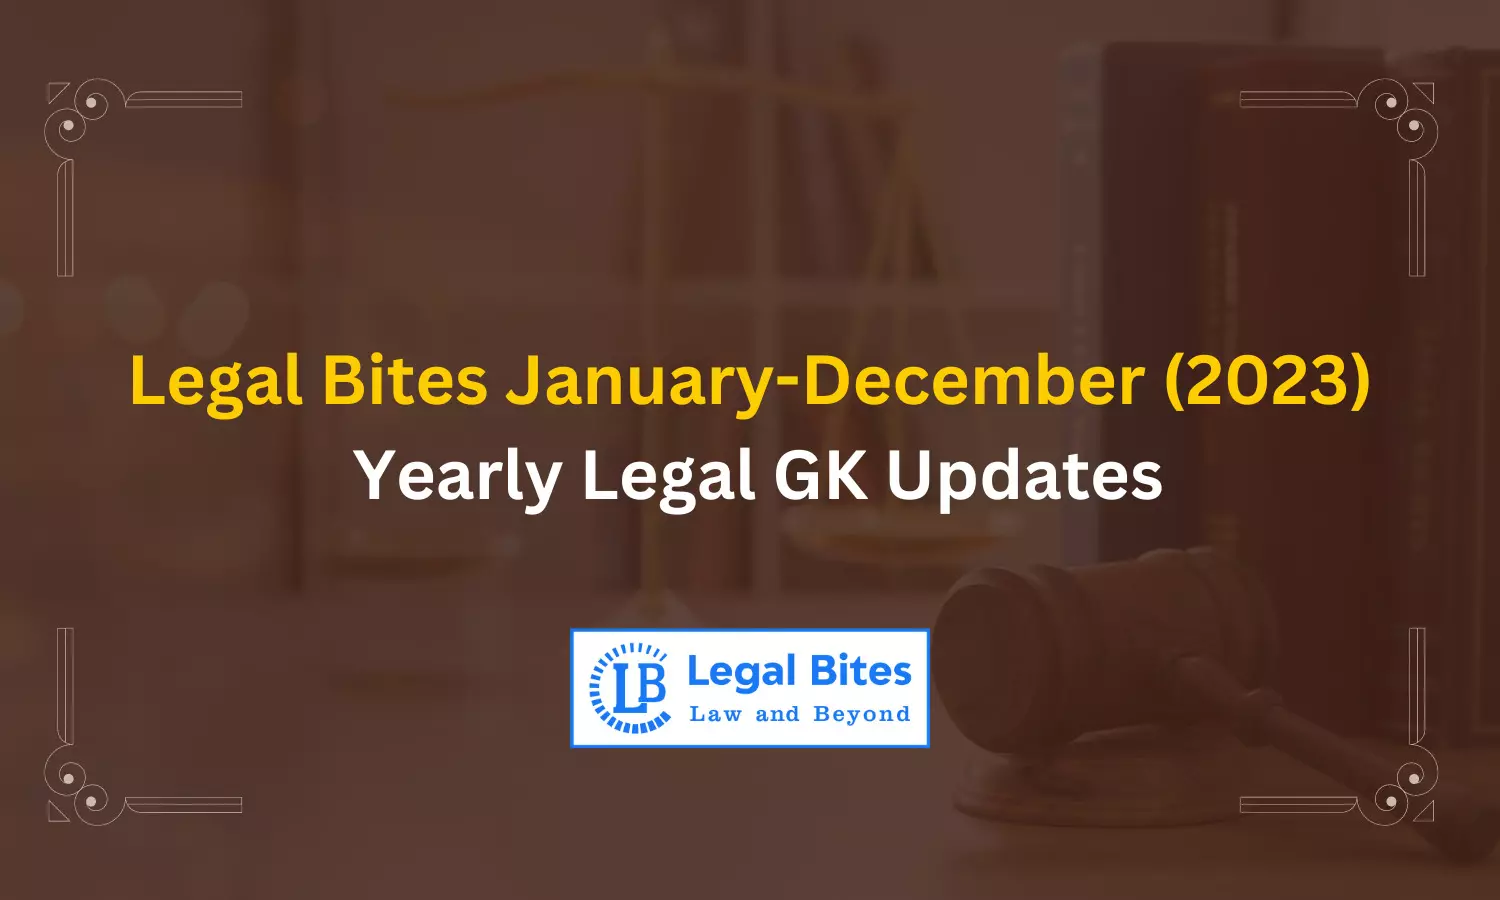 Yearly Legal GK Updates 2023: Legal Bites January-December